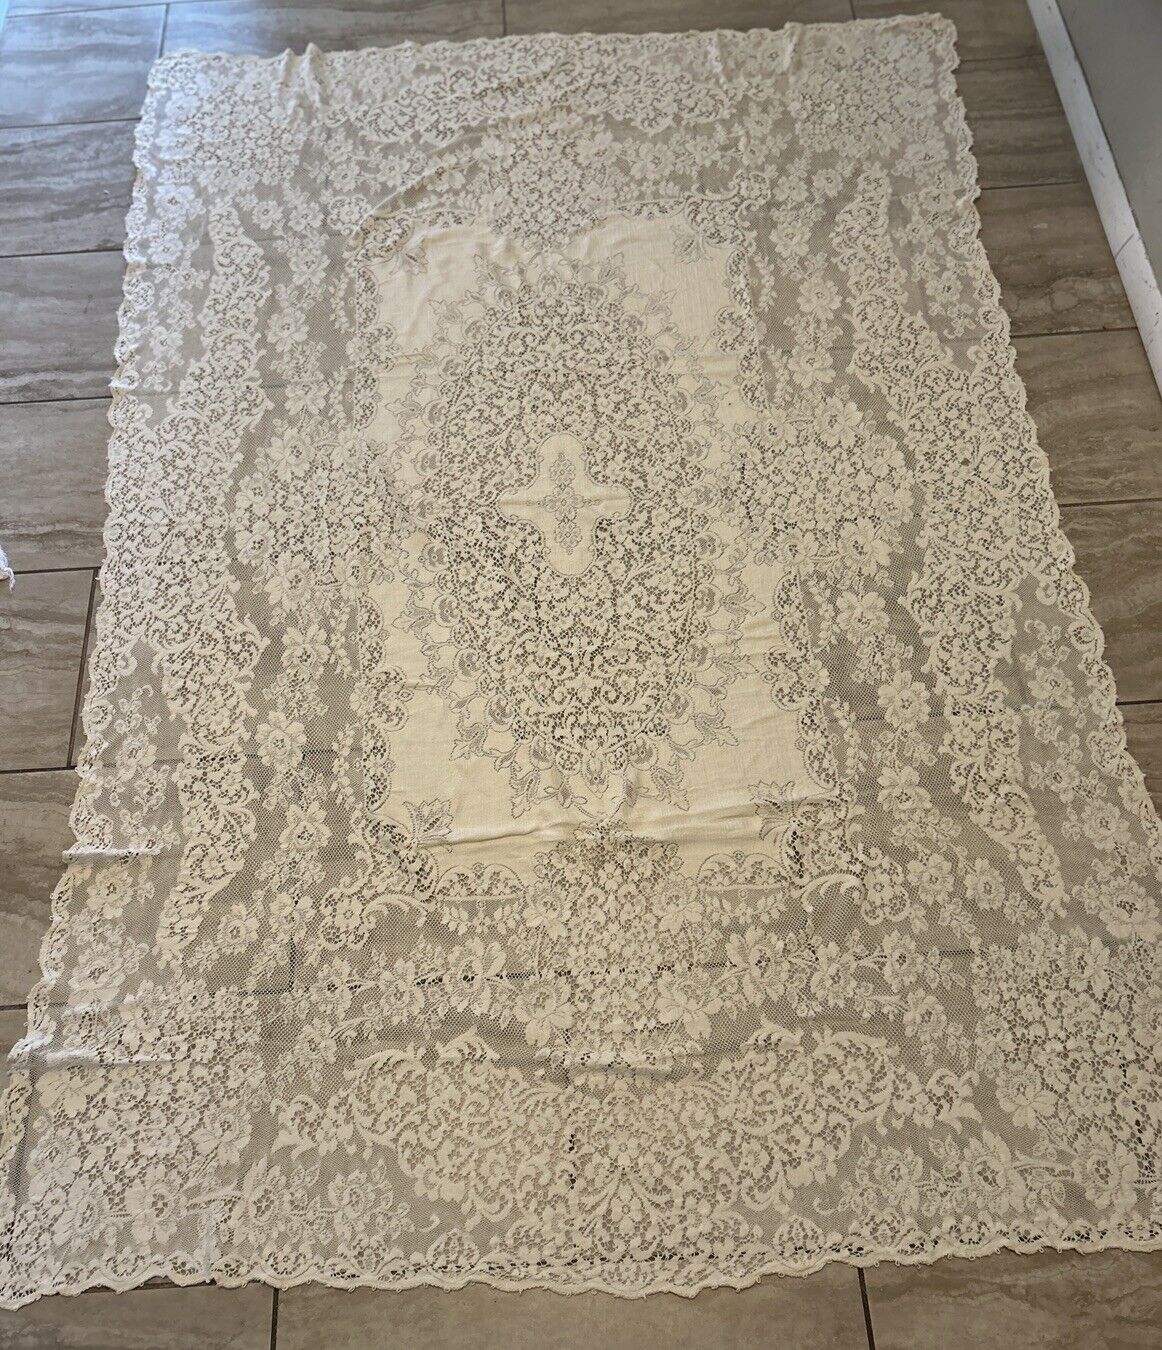 Vintage Quaker Off White Floral Lace Tablecloth 78x52 Inches.